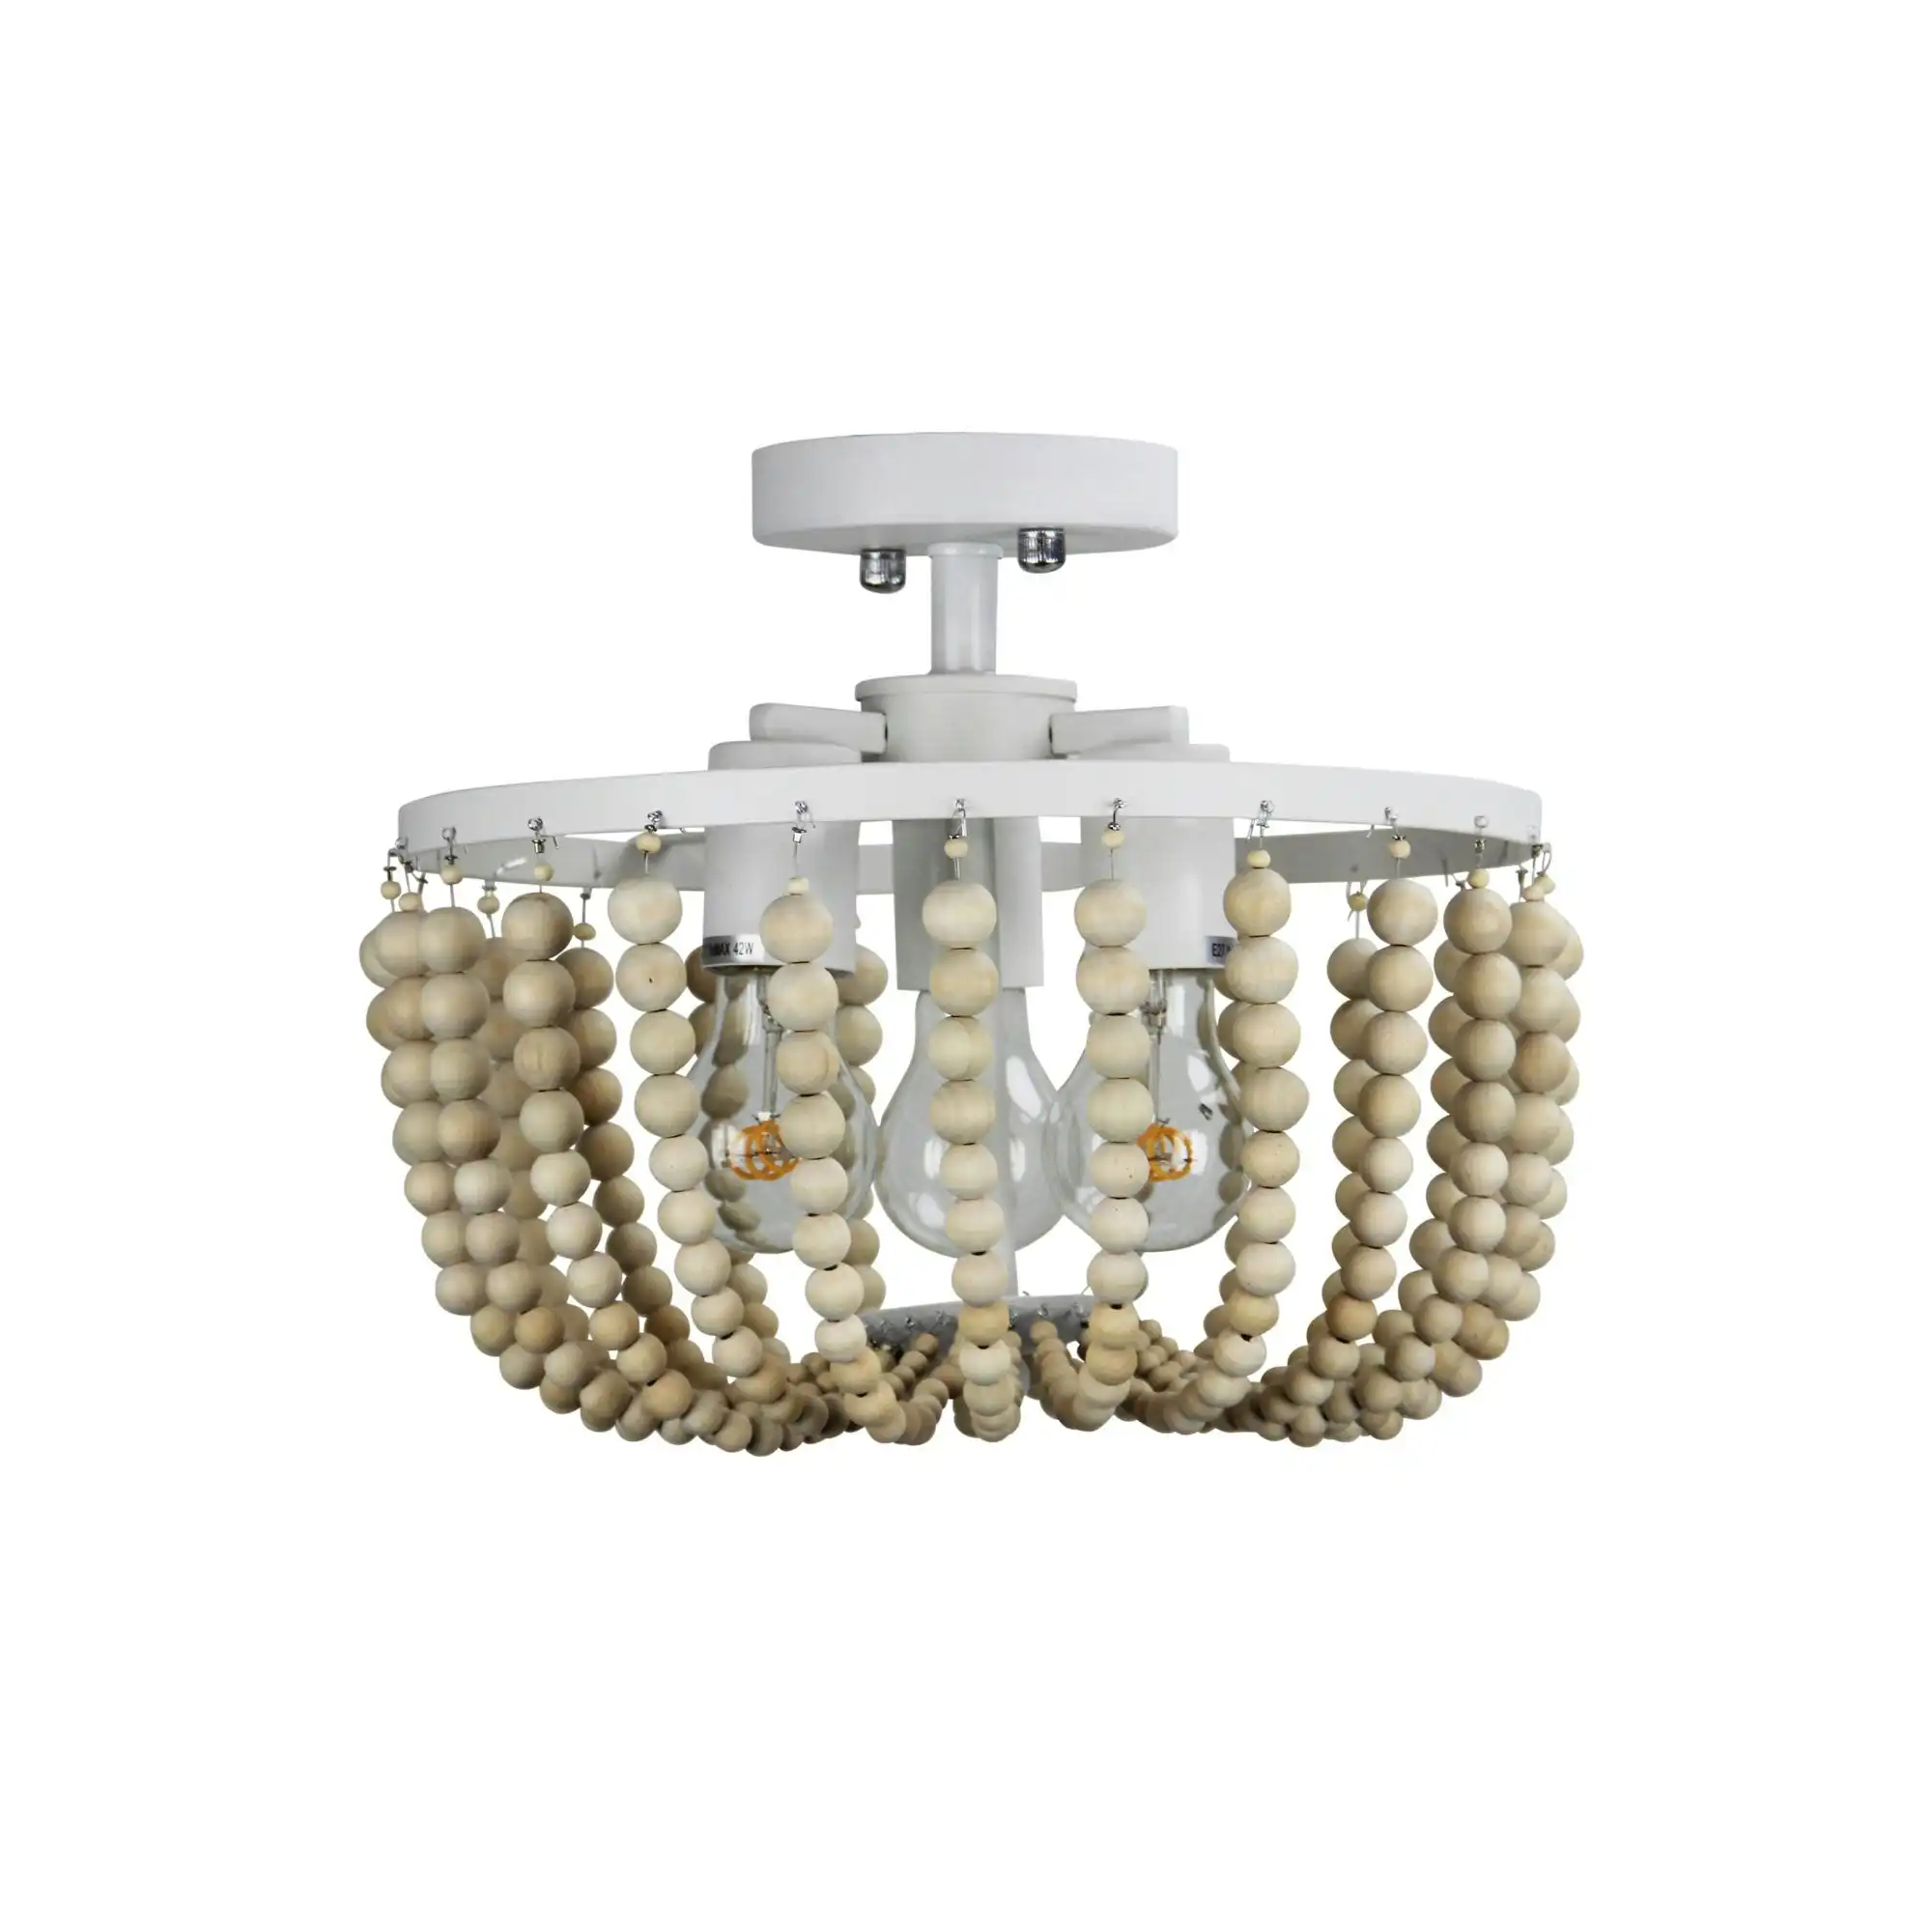 Cascara CTC Natural Wooden Beaded Ceiling Light